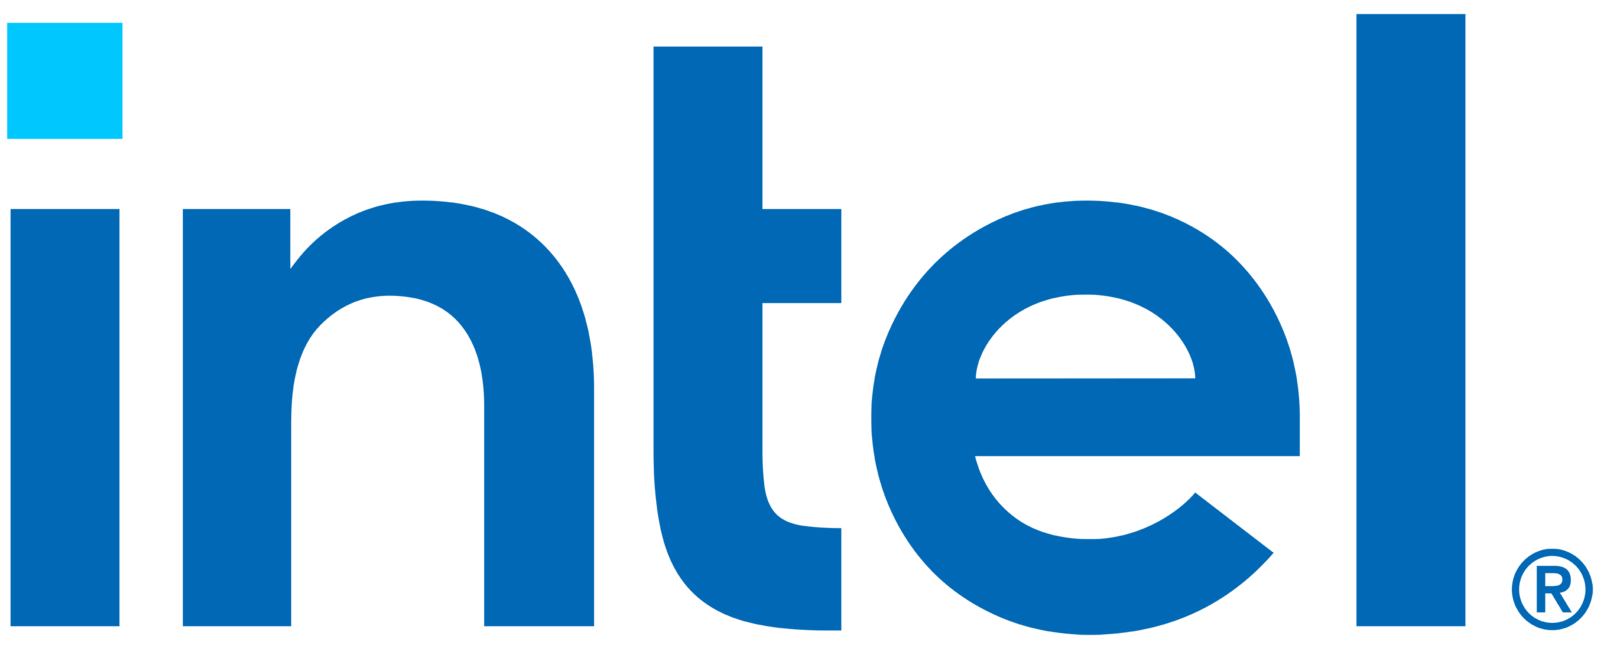 Intel, a Company that uses TablePlus